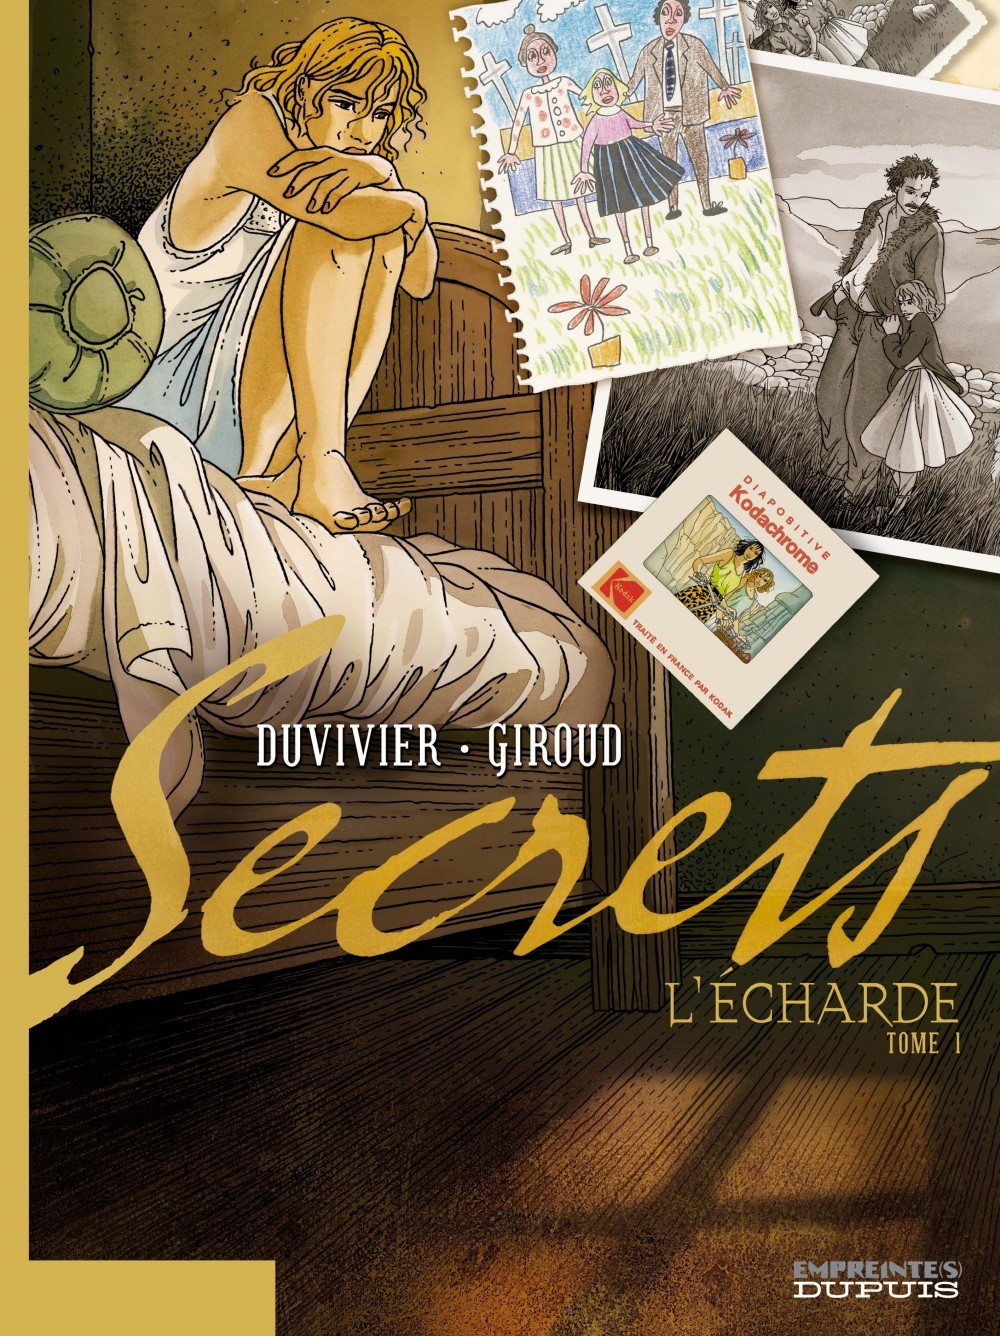 Secrets, L'Écharde - Tome 1 - Secrets, L'Écharde, tome 1/2 (9782800136035-front-cover)